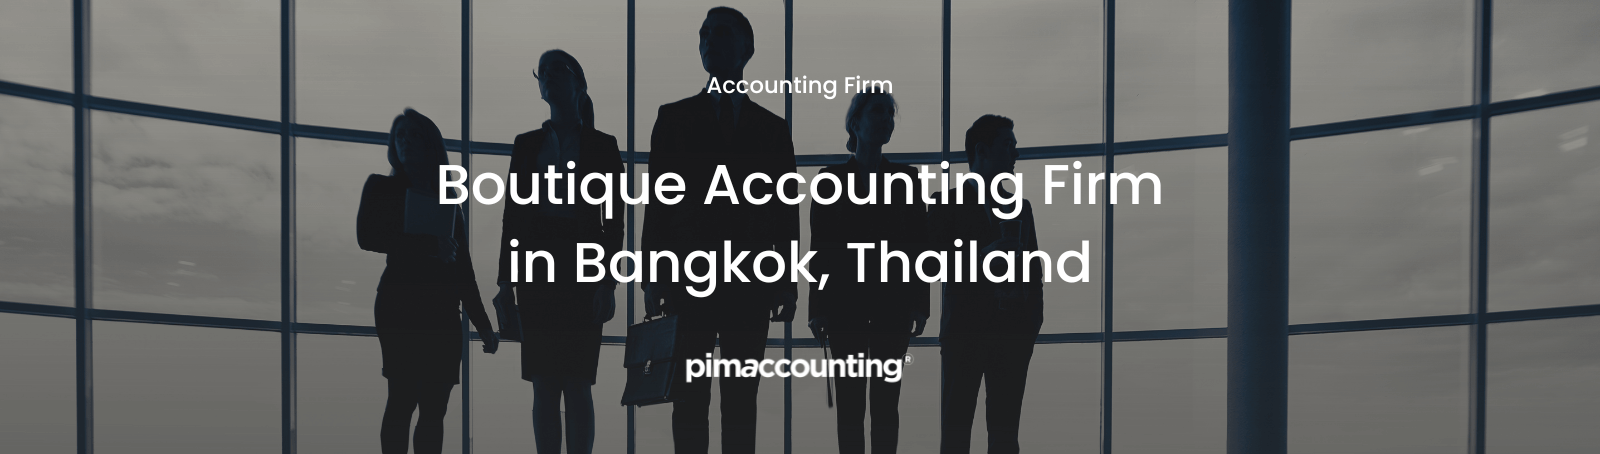 Boutique Accounting Firm in Bangkok